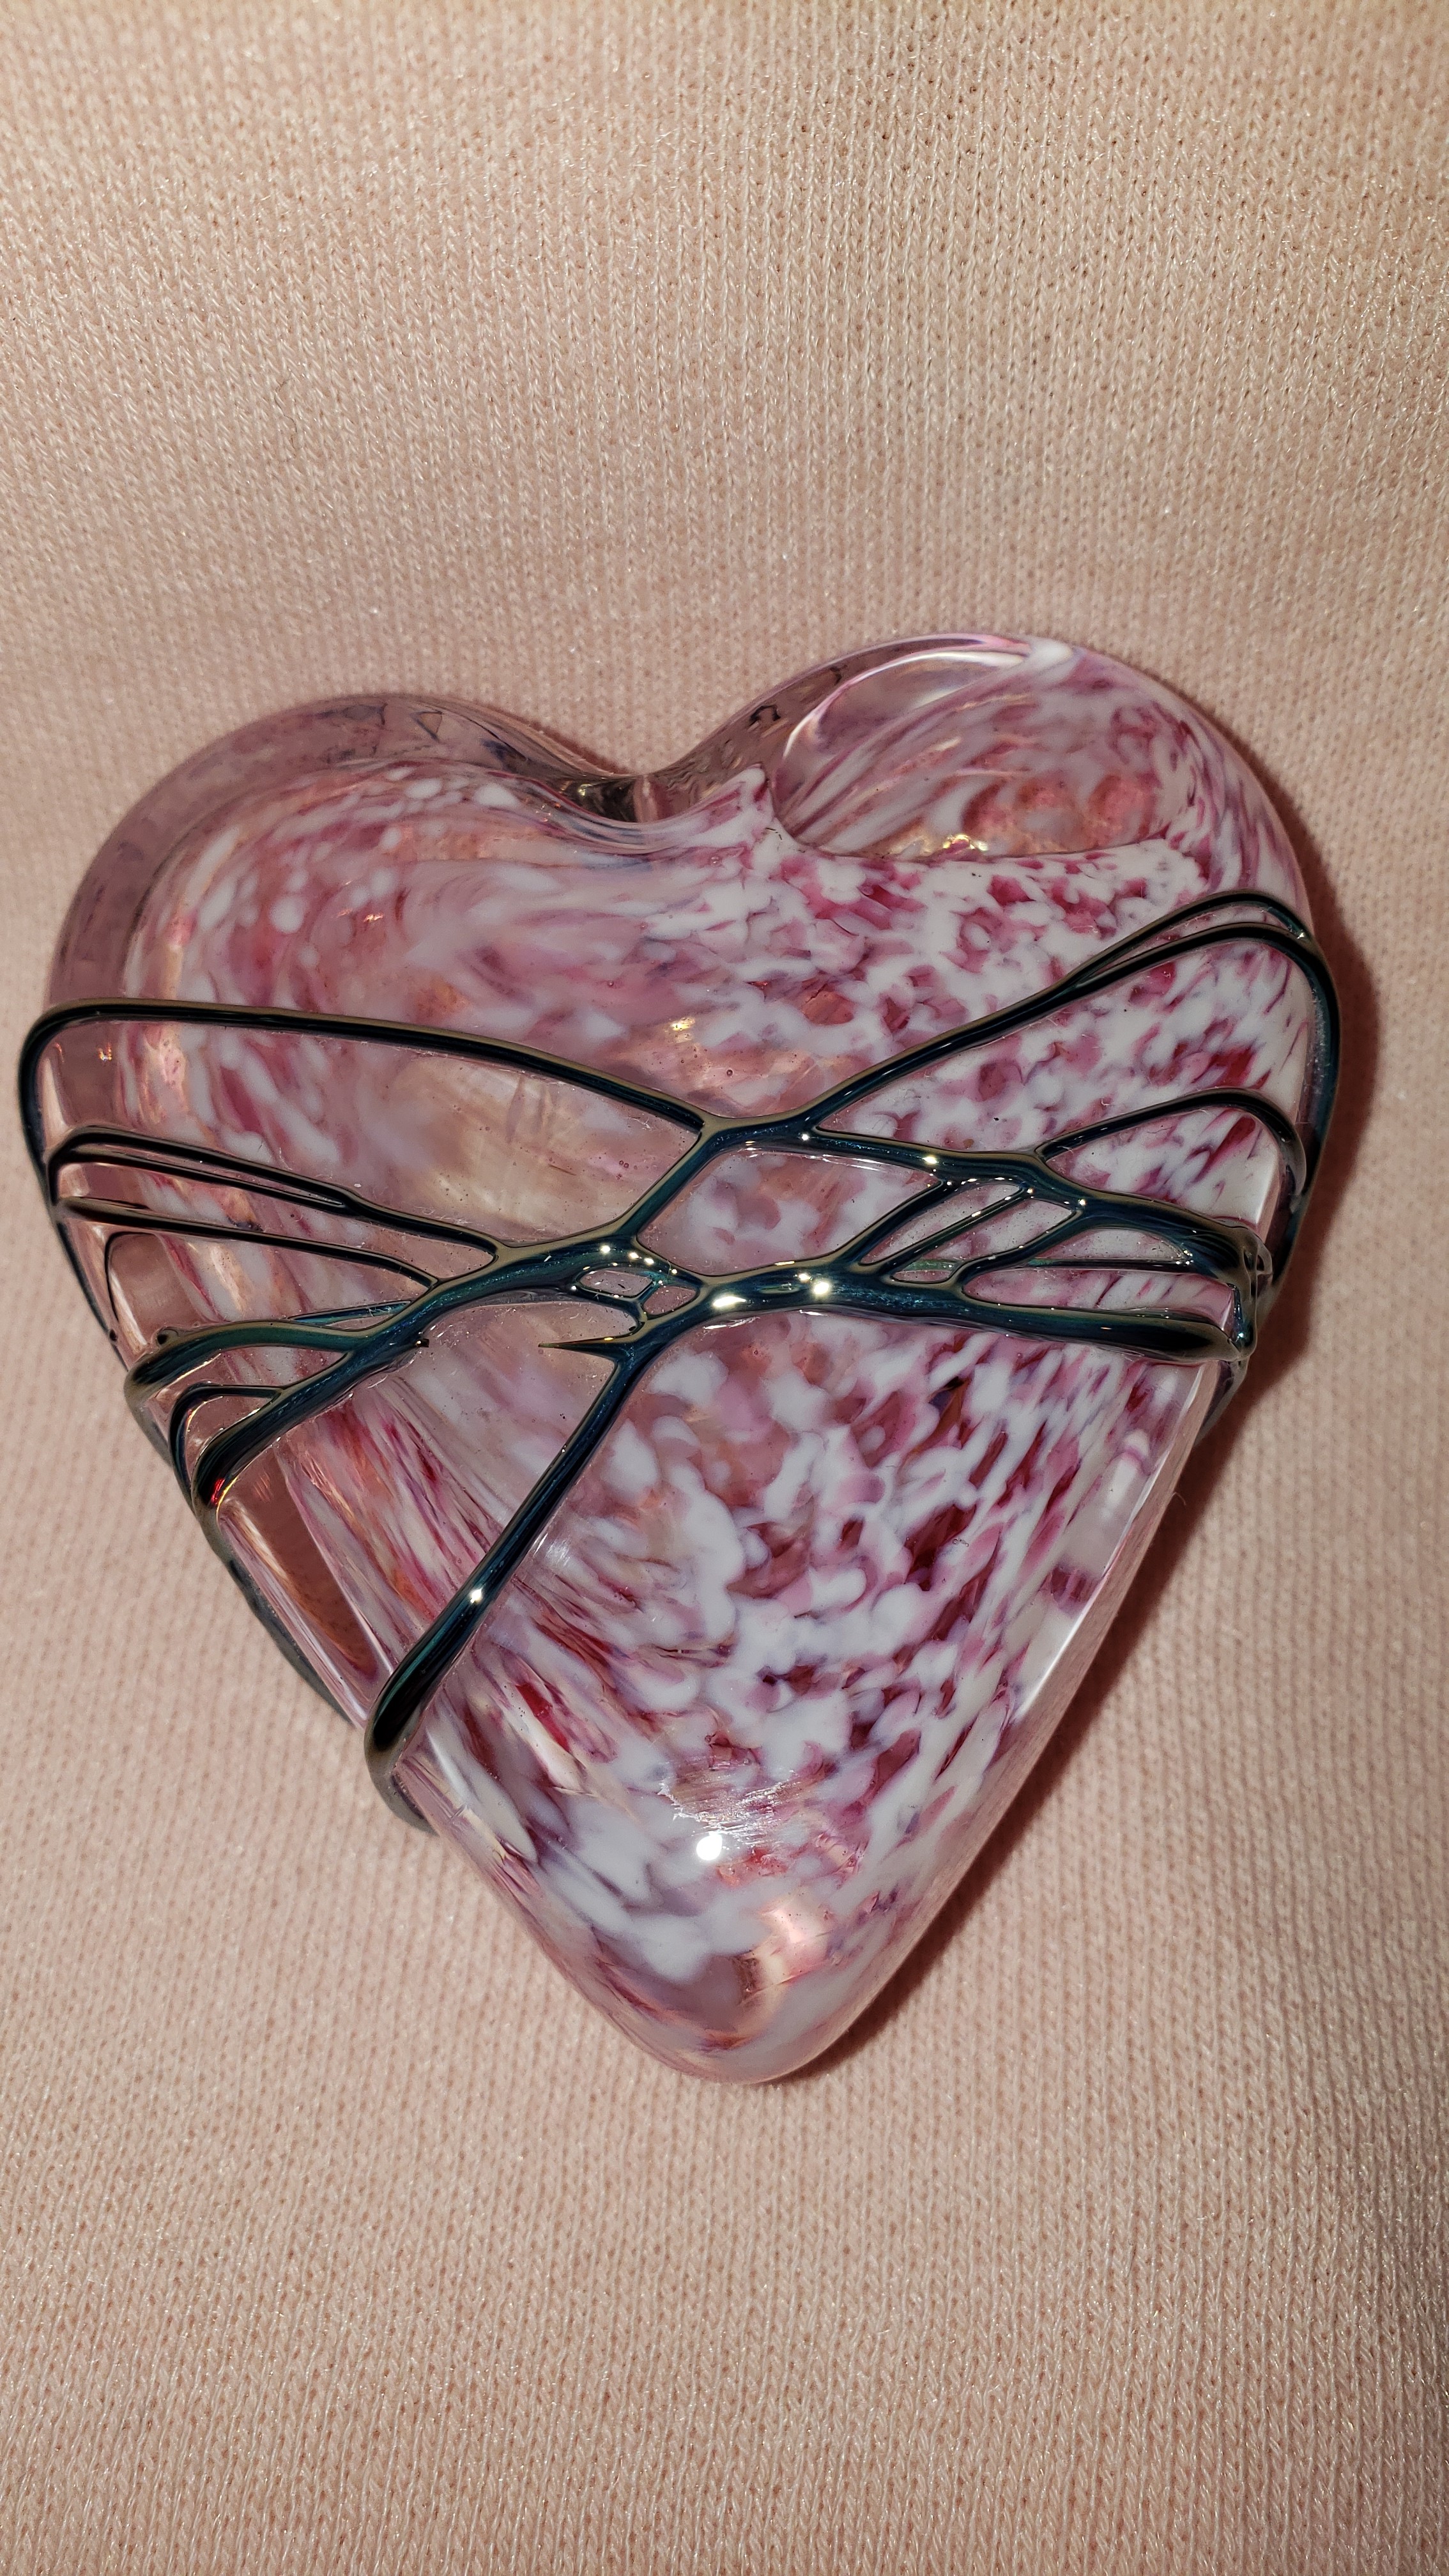 Speckled Pink and White Glass Heart Paperweight w/ Silver Drizzle - by David Salazar As Seen In...